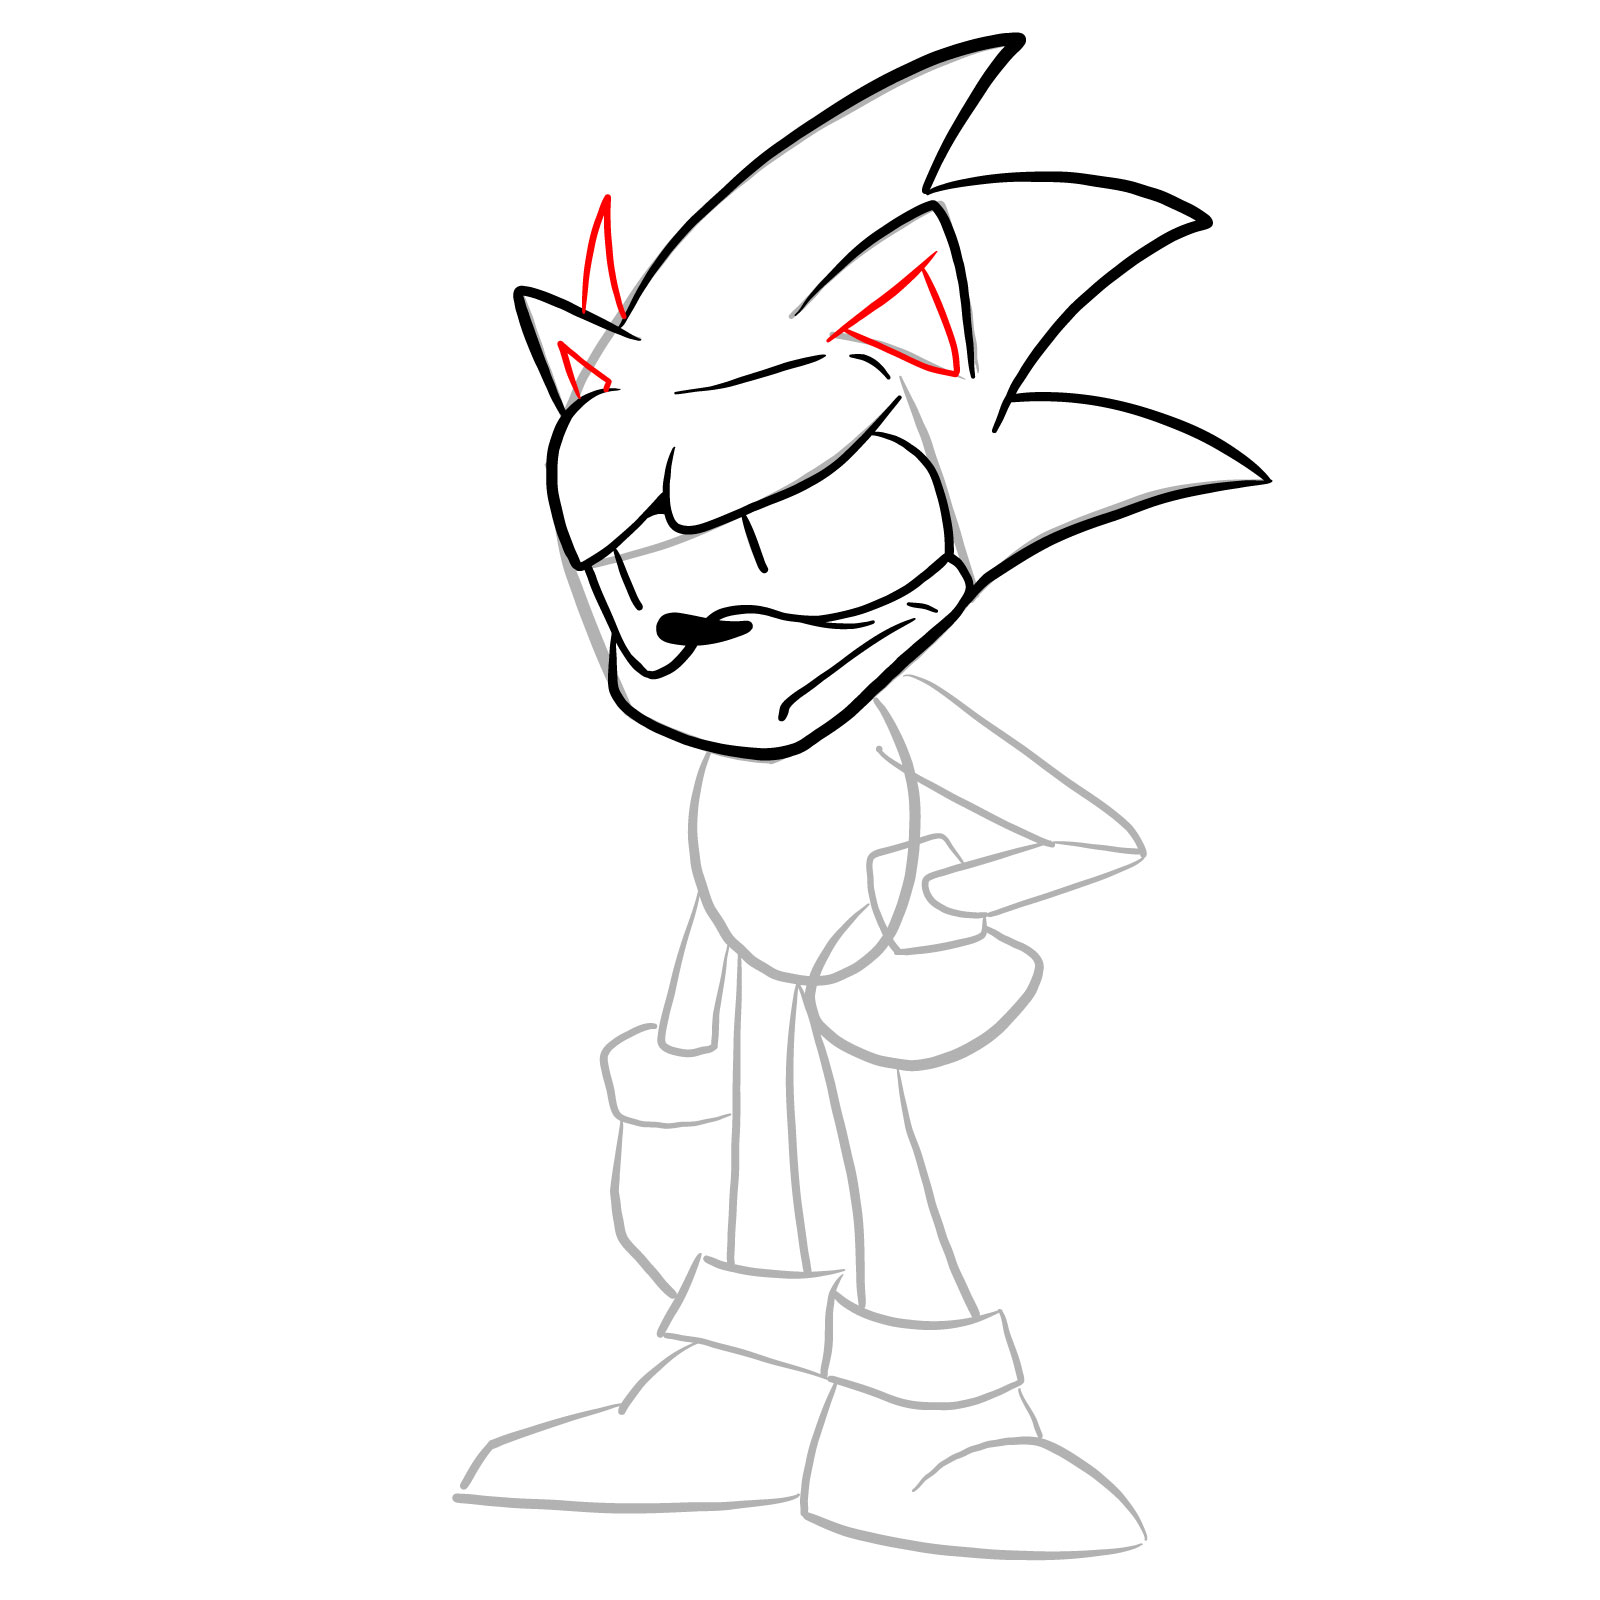 How to draw Sonic - FNF: Secret Histories - step 12